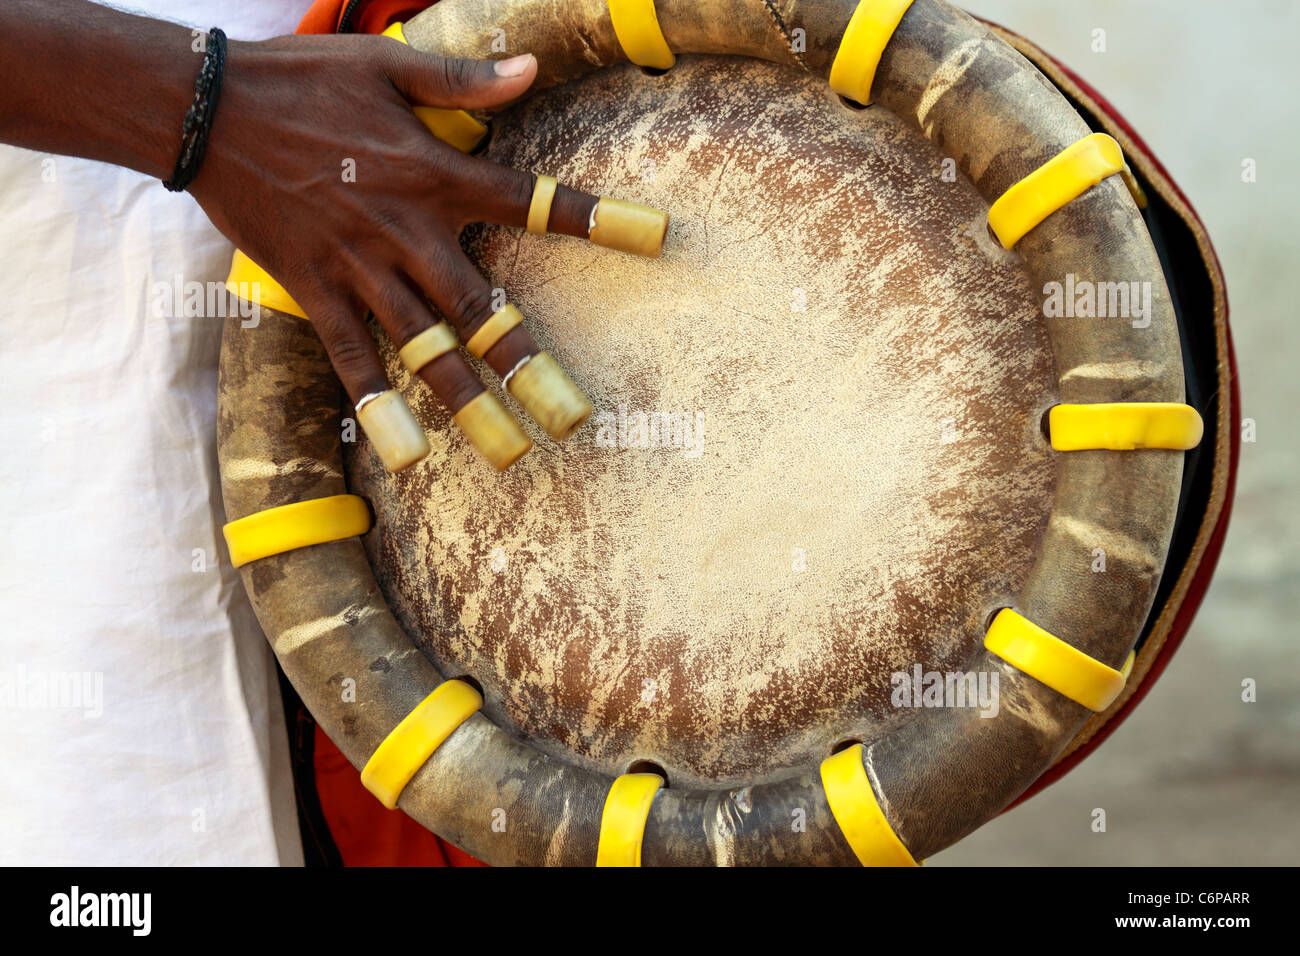 Indian drum player Stock Photo, Royalty Free Image: 38600123 - Alamy